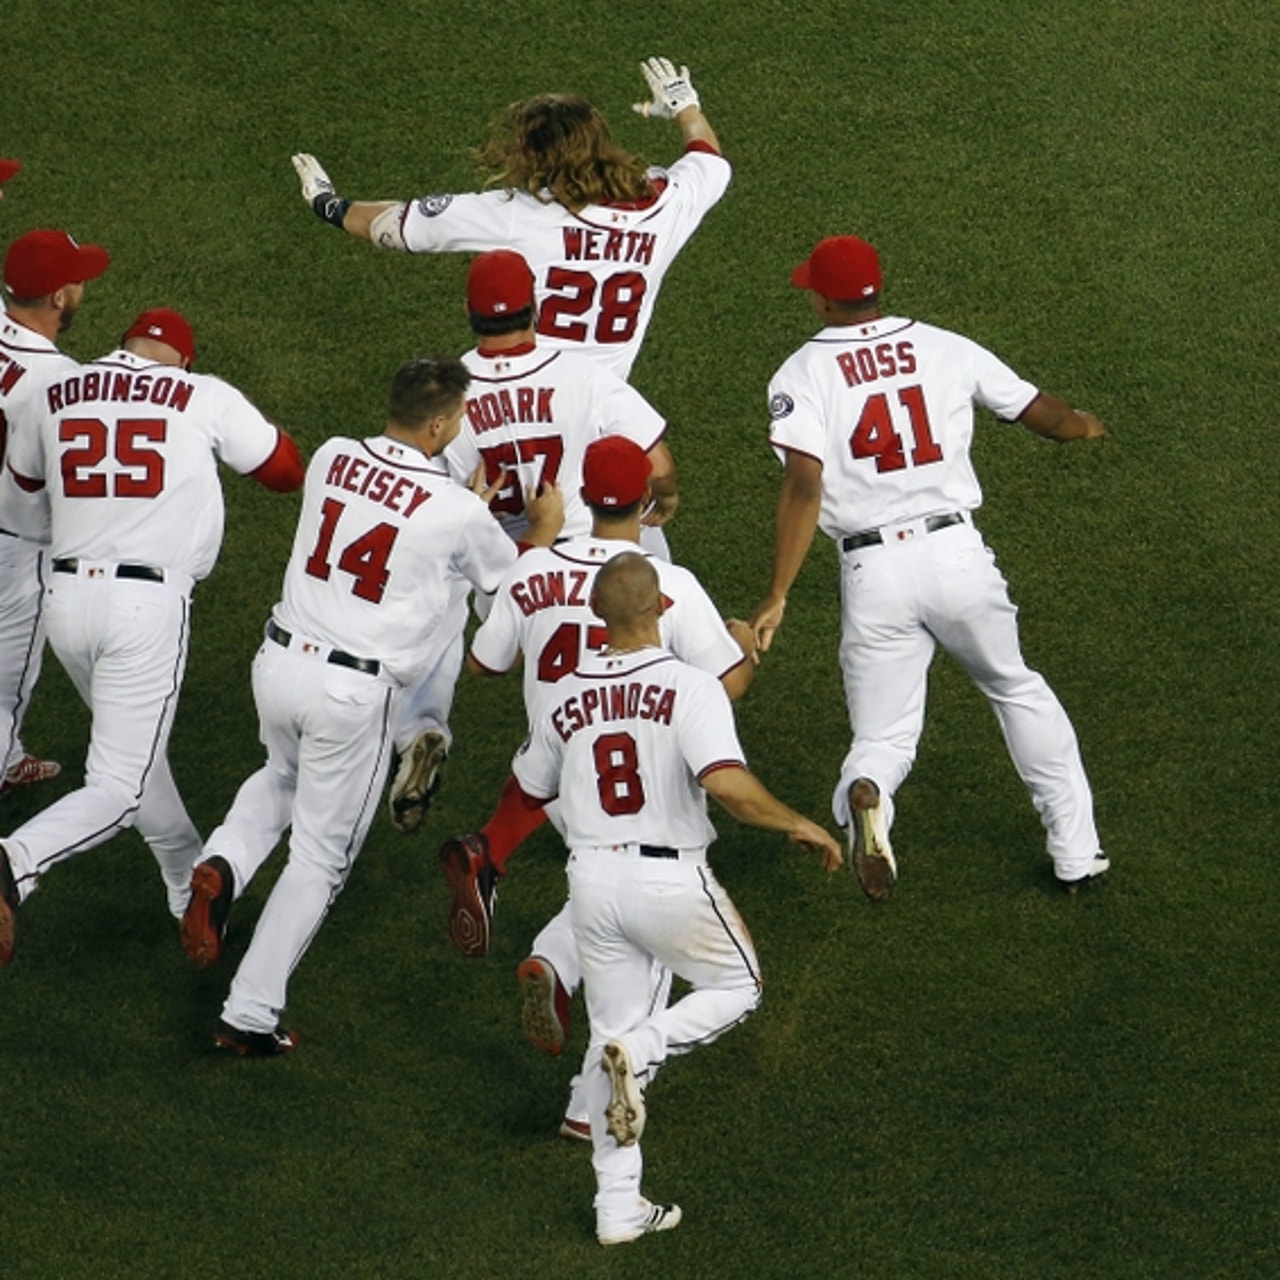 DC = Division Champions - Nats win third NL East title % - William